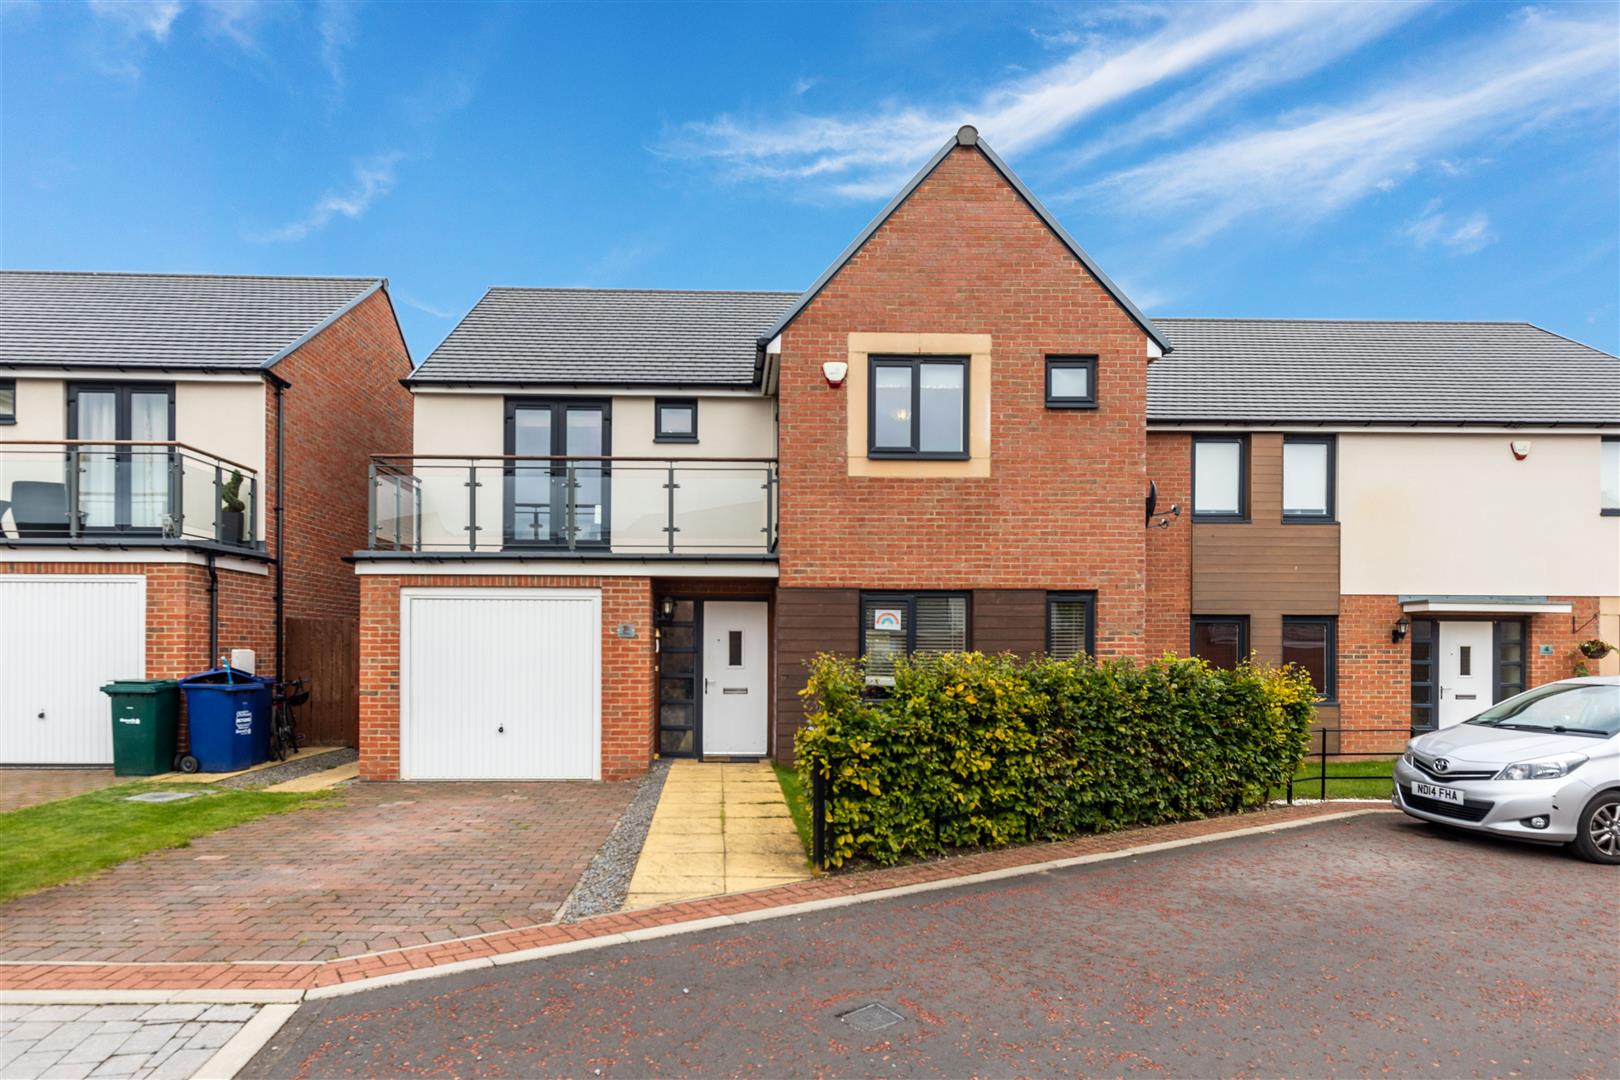 4 bed detached house for sale in Hethpool Court, Great Park  - Property Image 1